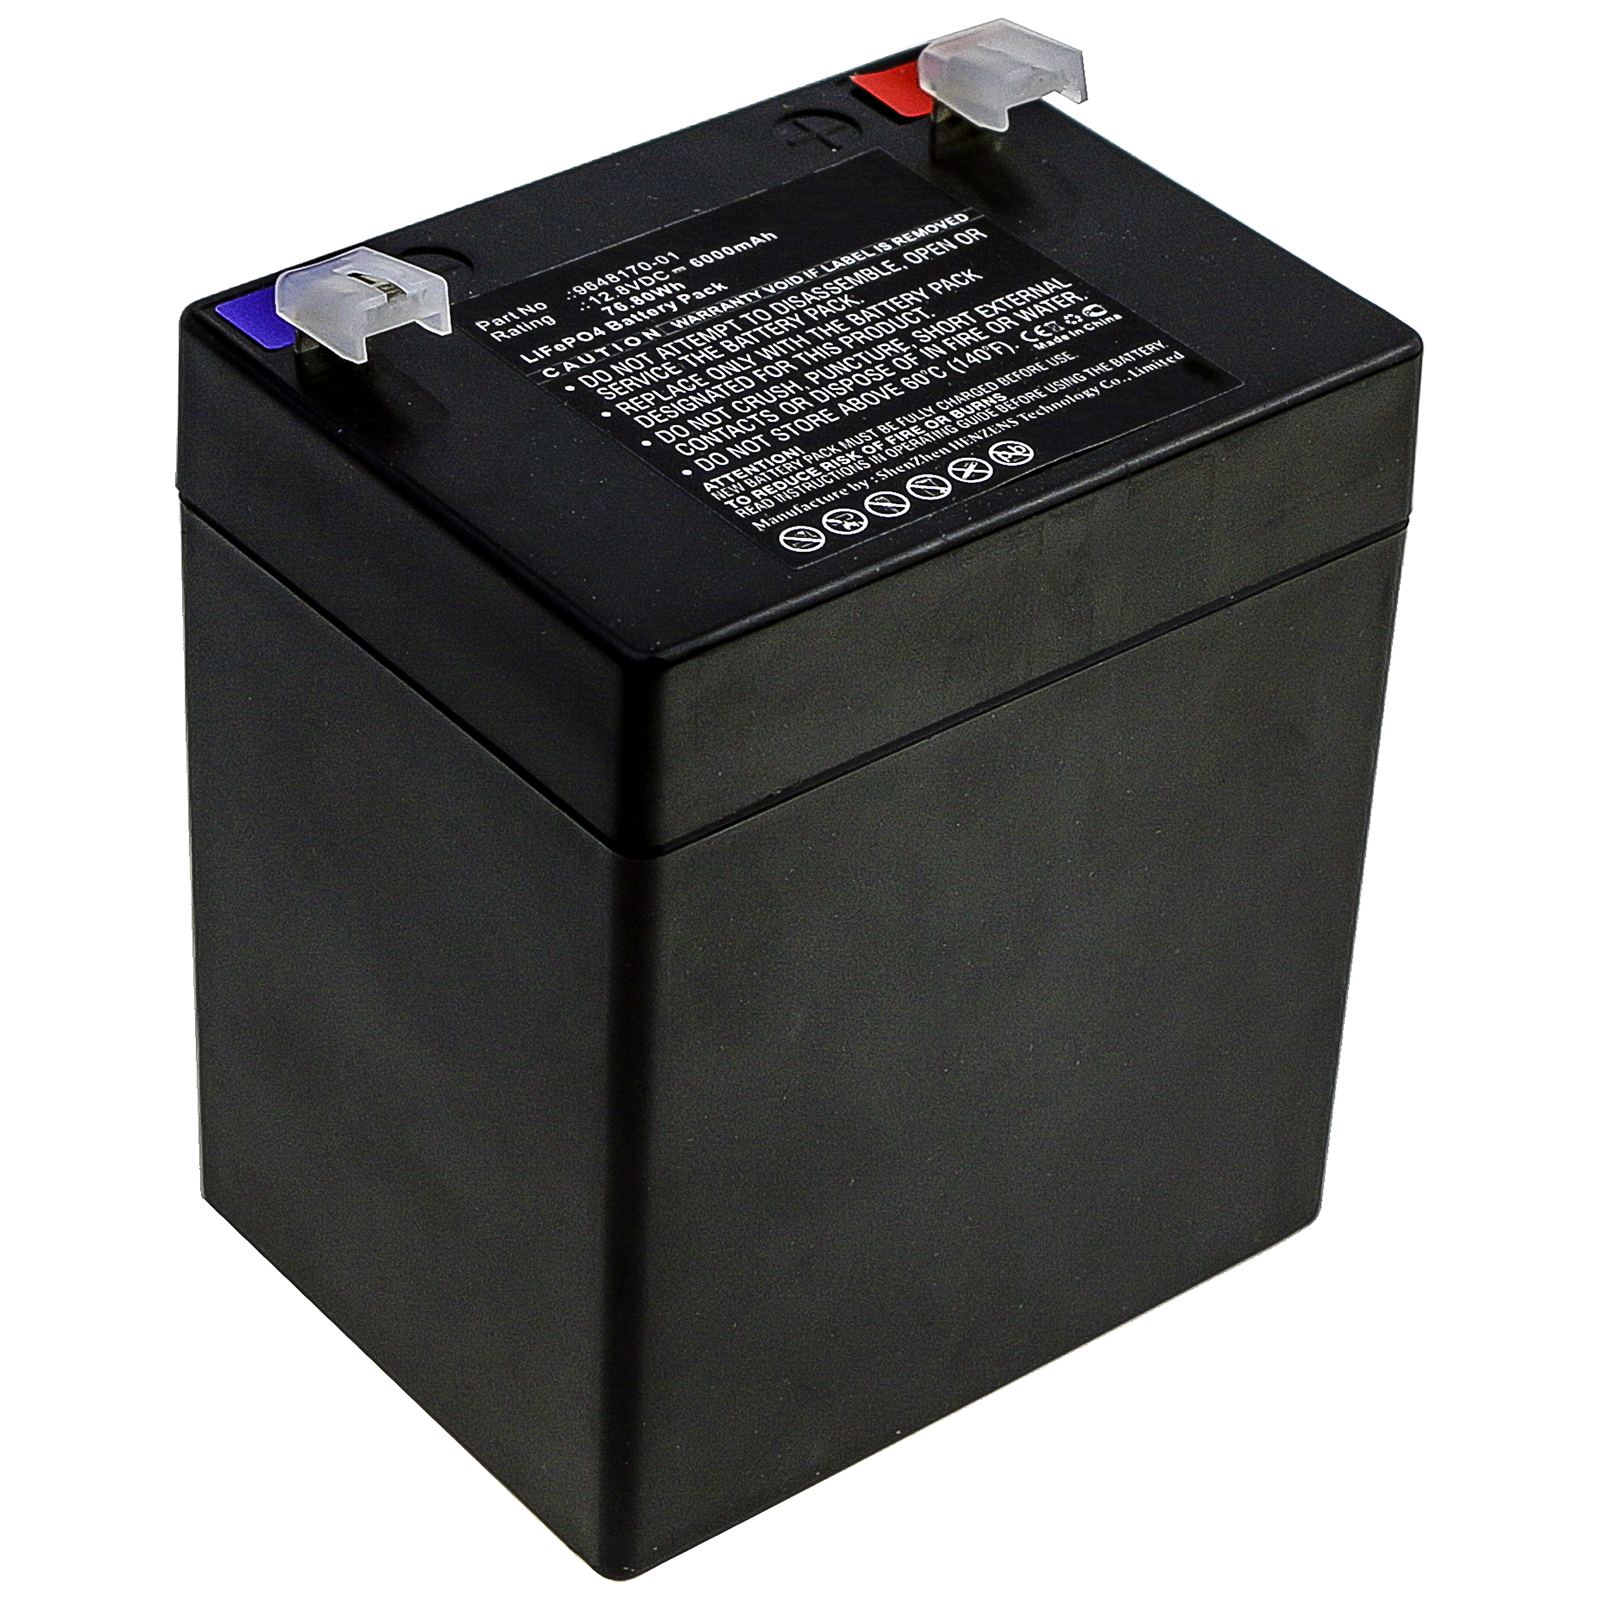 Synergy Digital Lawn Mower Battery, Compatible with Flymo 9648170-01 Lawn Mower Battery (12.8V, LiFePO4, 6000mAh)